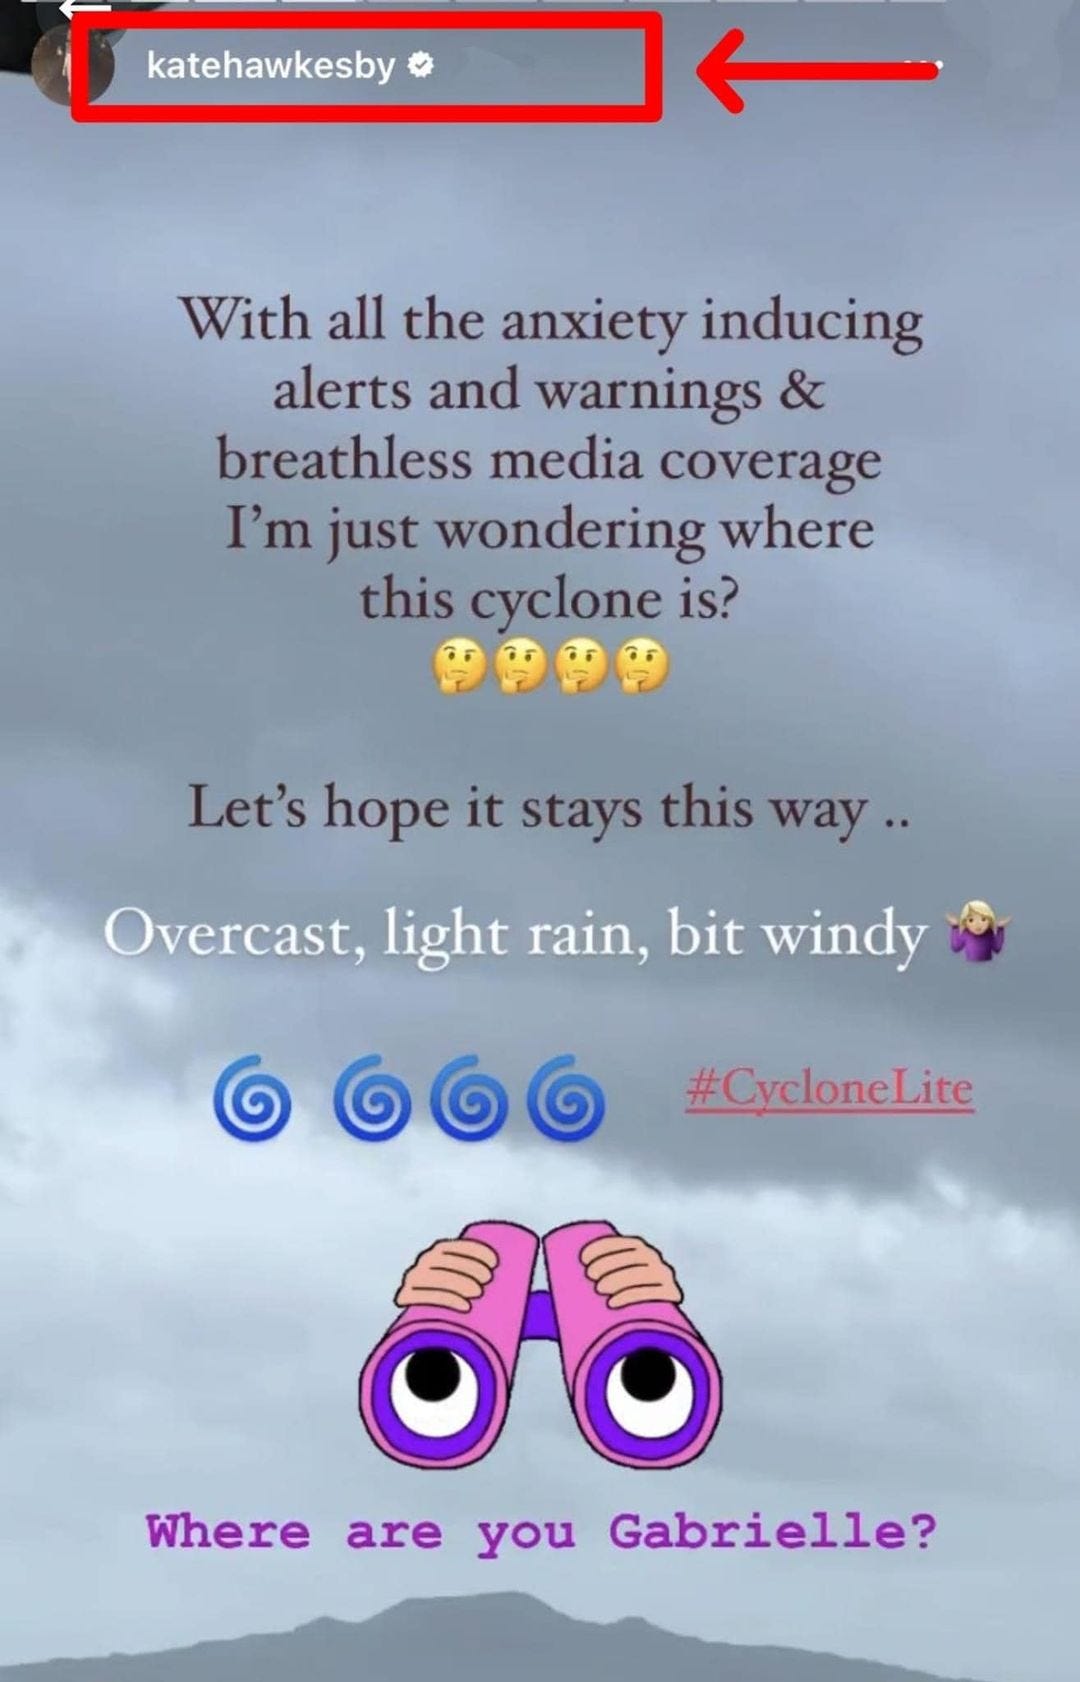 An image of a cloudy sky overlaid with text that says: katehawkesby With all the anxiety inducing alerts and warnings & breathless media coverage I'm just wondering where this cyclone is? Let's hope it stays this way.. Overcast, light rain, bit windy #CycloneLite Where are you Gabrielle?'